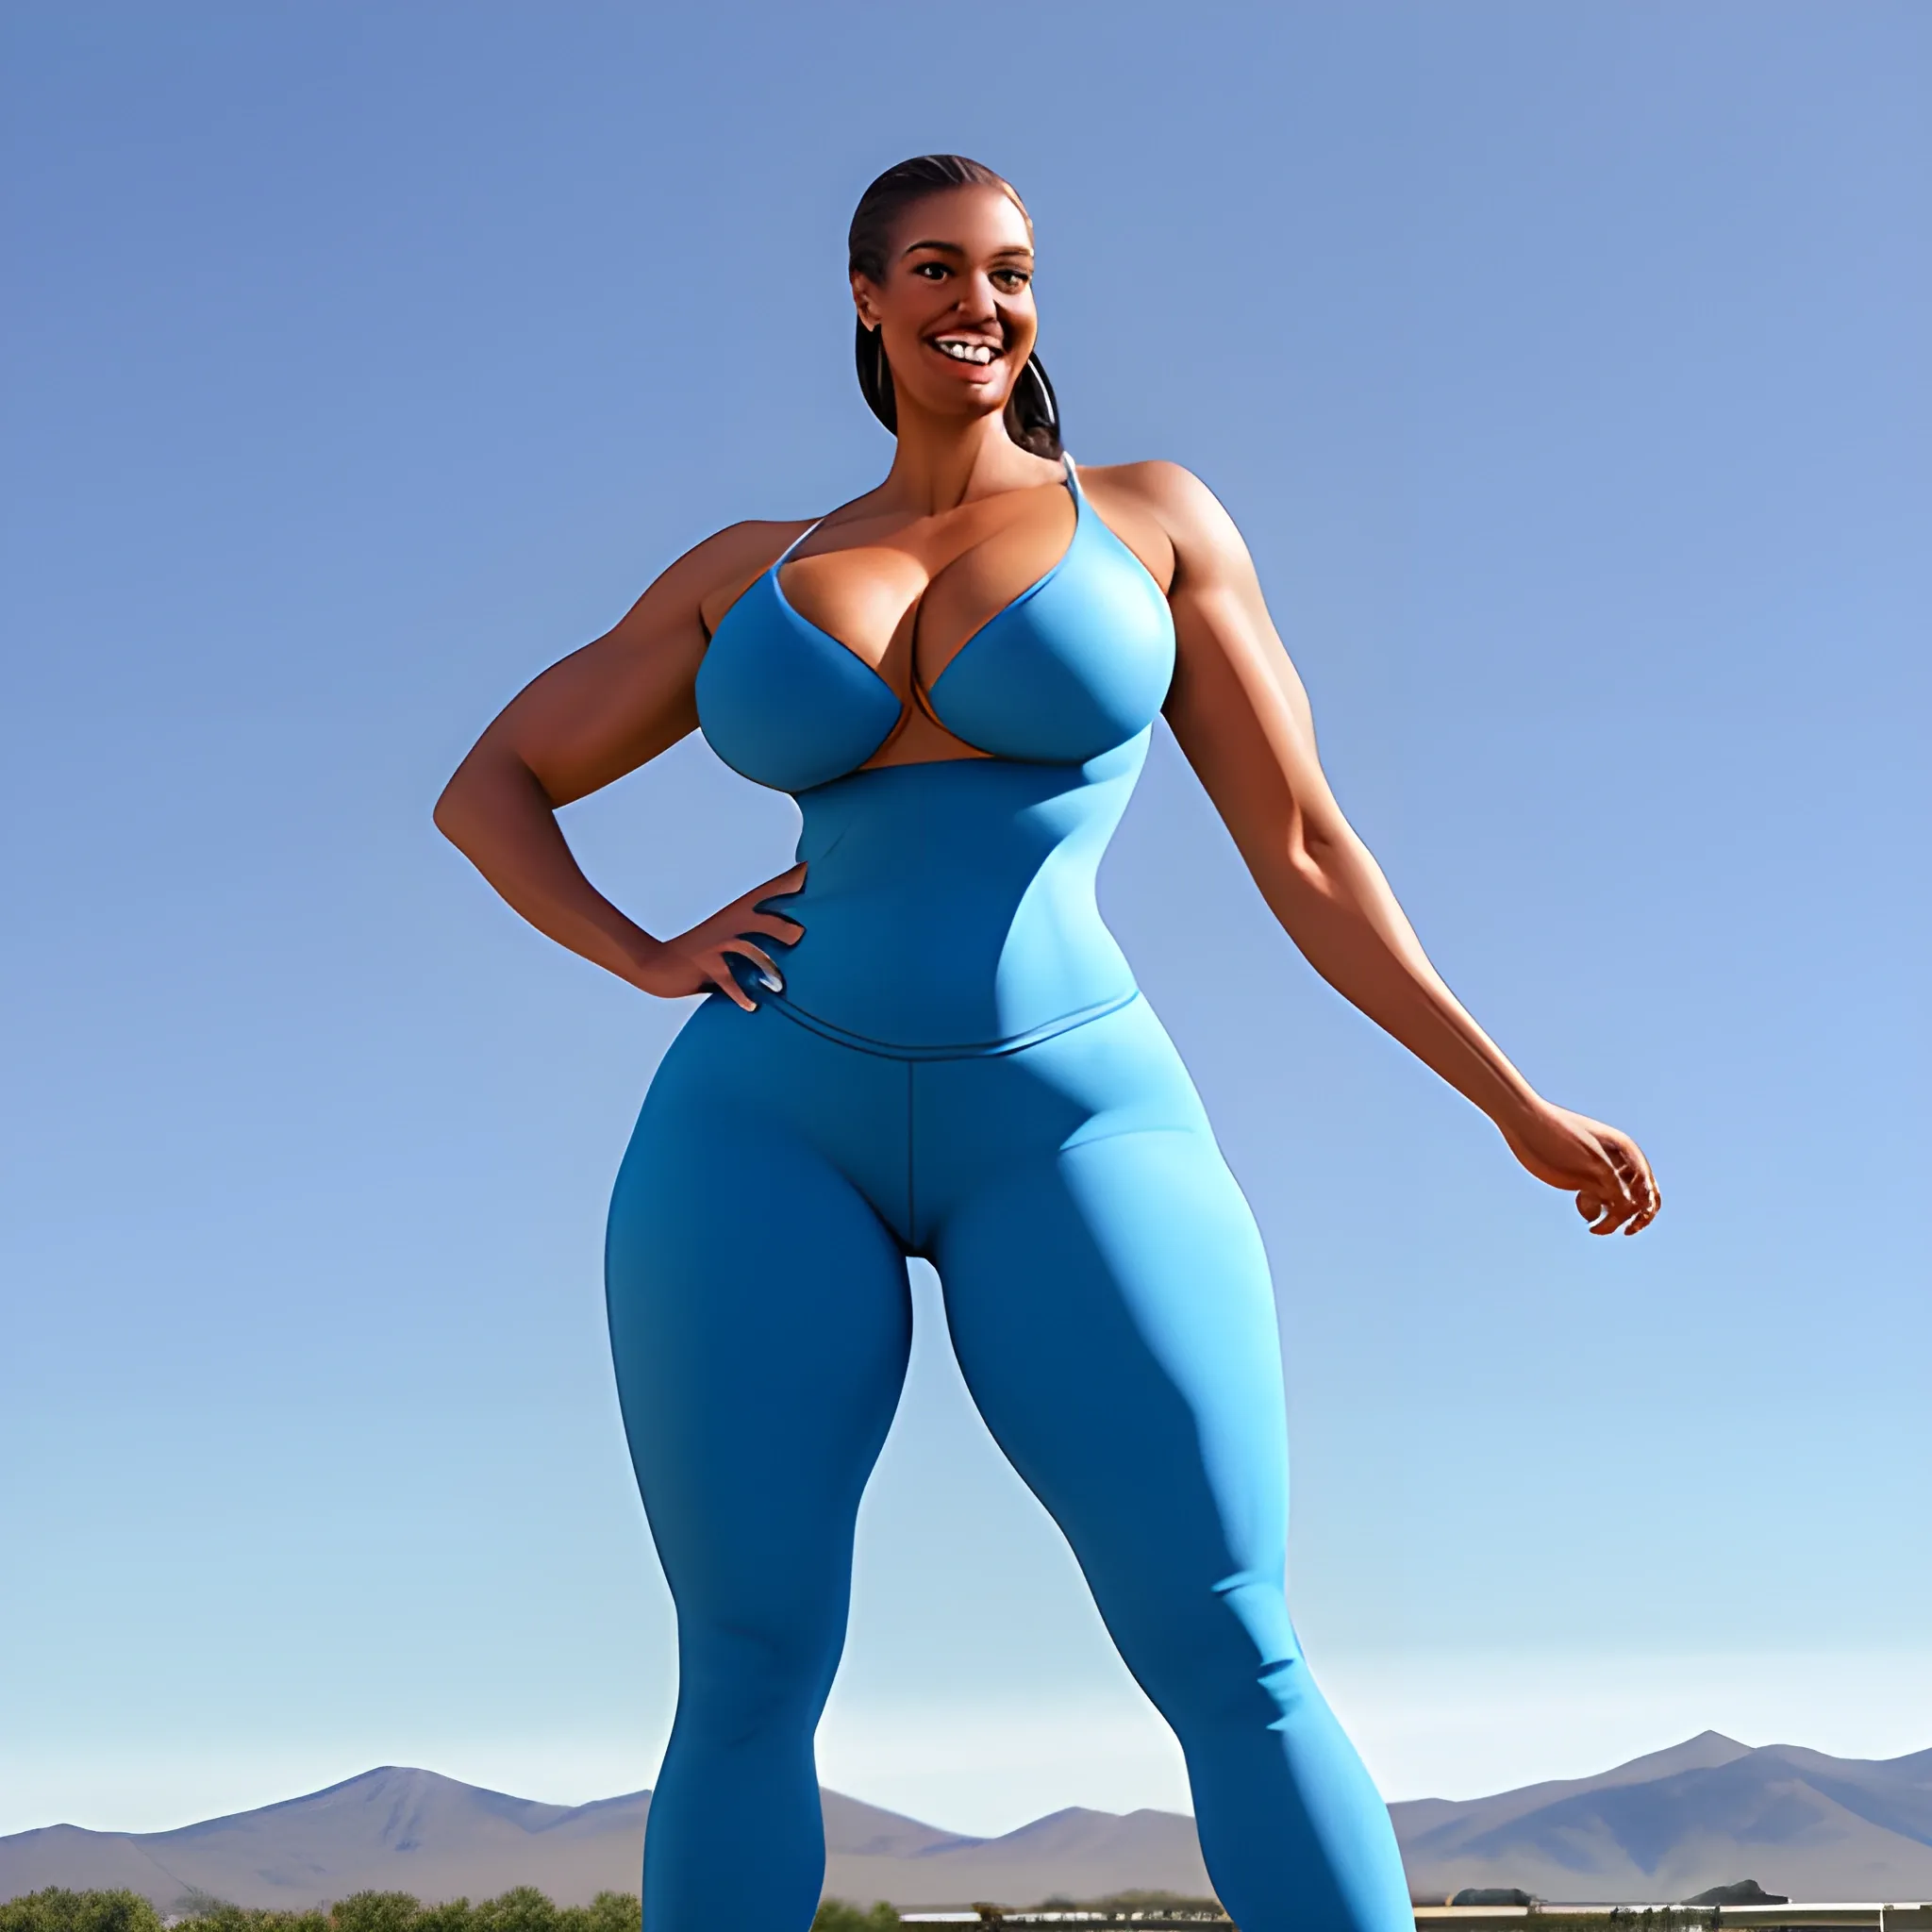 8 ft tall mighty voluptuous and smoothly muscular gently smiling beautiful young blonde girl with small head, broad shoulders, yet flat breast, straight hips and robust long legs standing on training grounds under blue sky